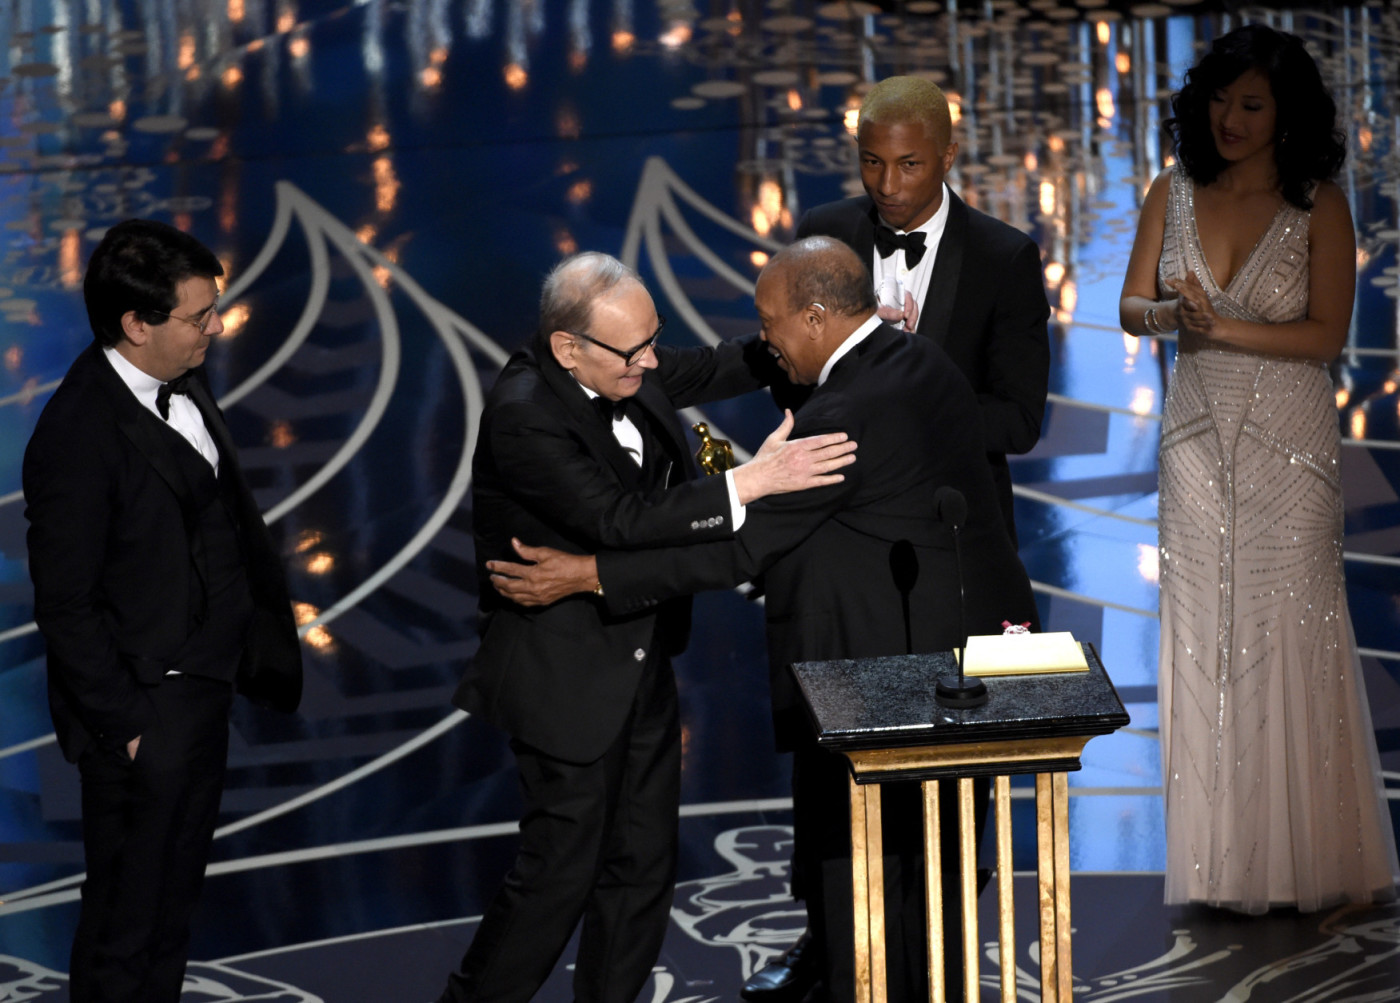 Quincy Jones, center, and Pharell Williams, right, present Ennio Morricone with the award for best original score for The Hateful Eight at the Oscars on Sunday, Feb. 28, 2016, at the Dolby Theatre in Los Angeles. (Photo by Chris Pizzello/Invision/AP)